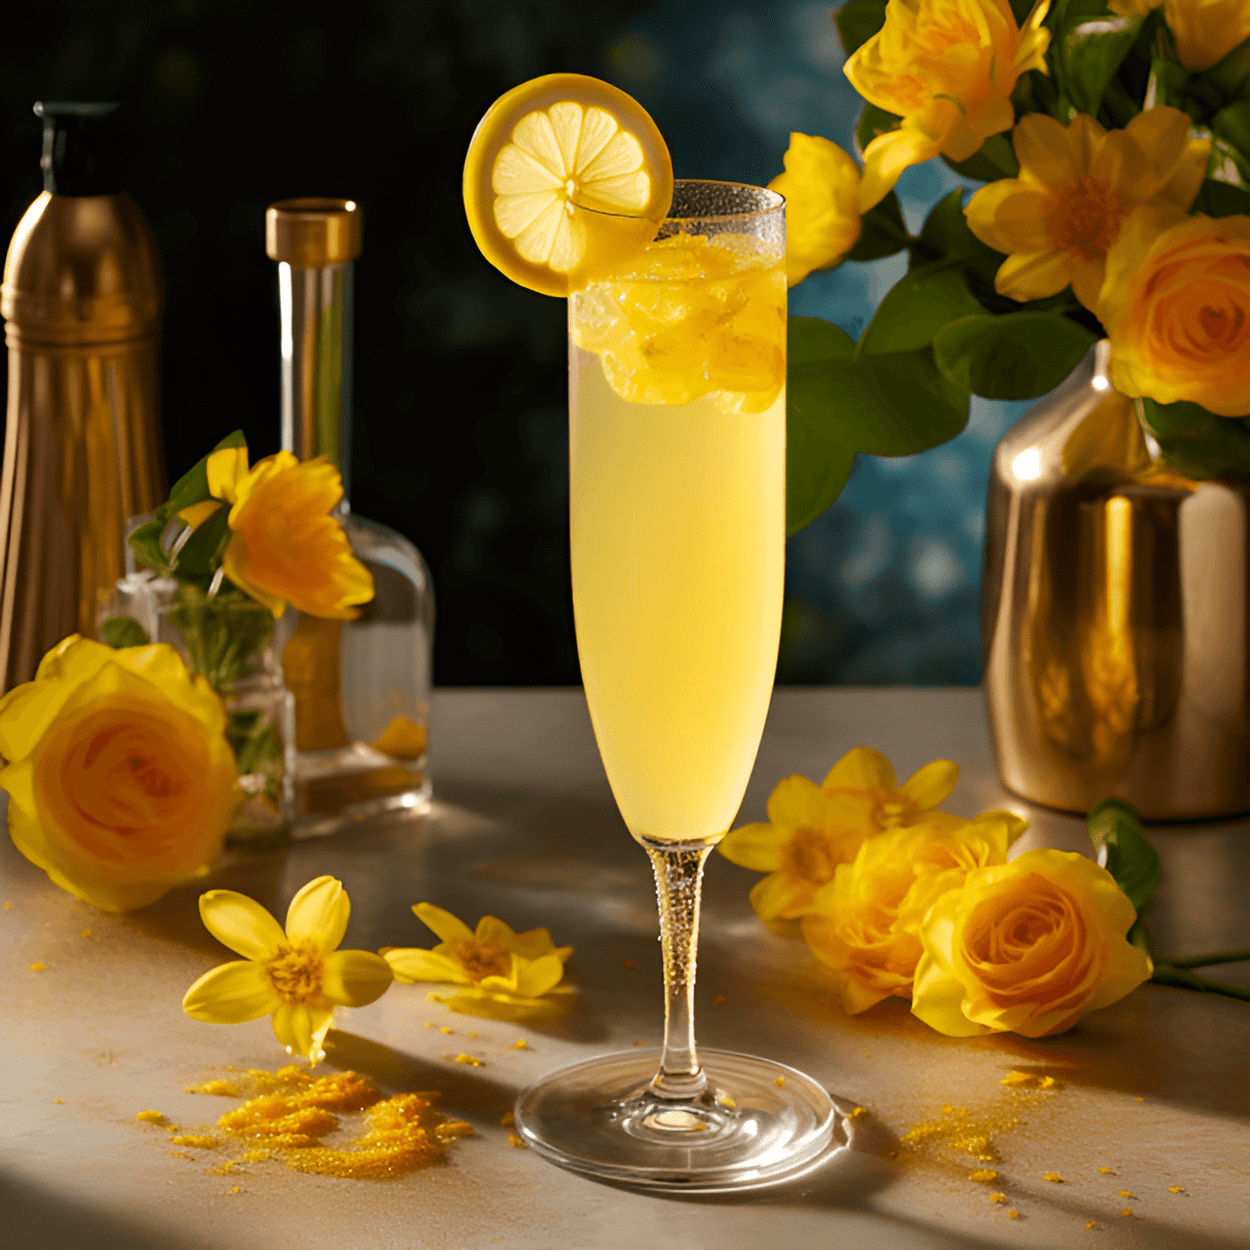 Sunflower Cocktail Recipe - The Sunflower cocktail is a harmonious blend of sweet, sour, and floral notes. The citrusy tang of the lemon juice is beautifully balanced by the sweetness of the elderflower liqueur, while the gin adds a refreshing kick. The taste is light, refreshing, and pleasantly sweet.